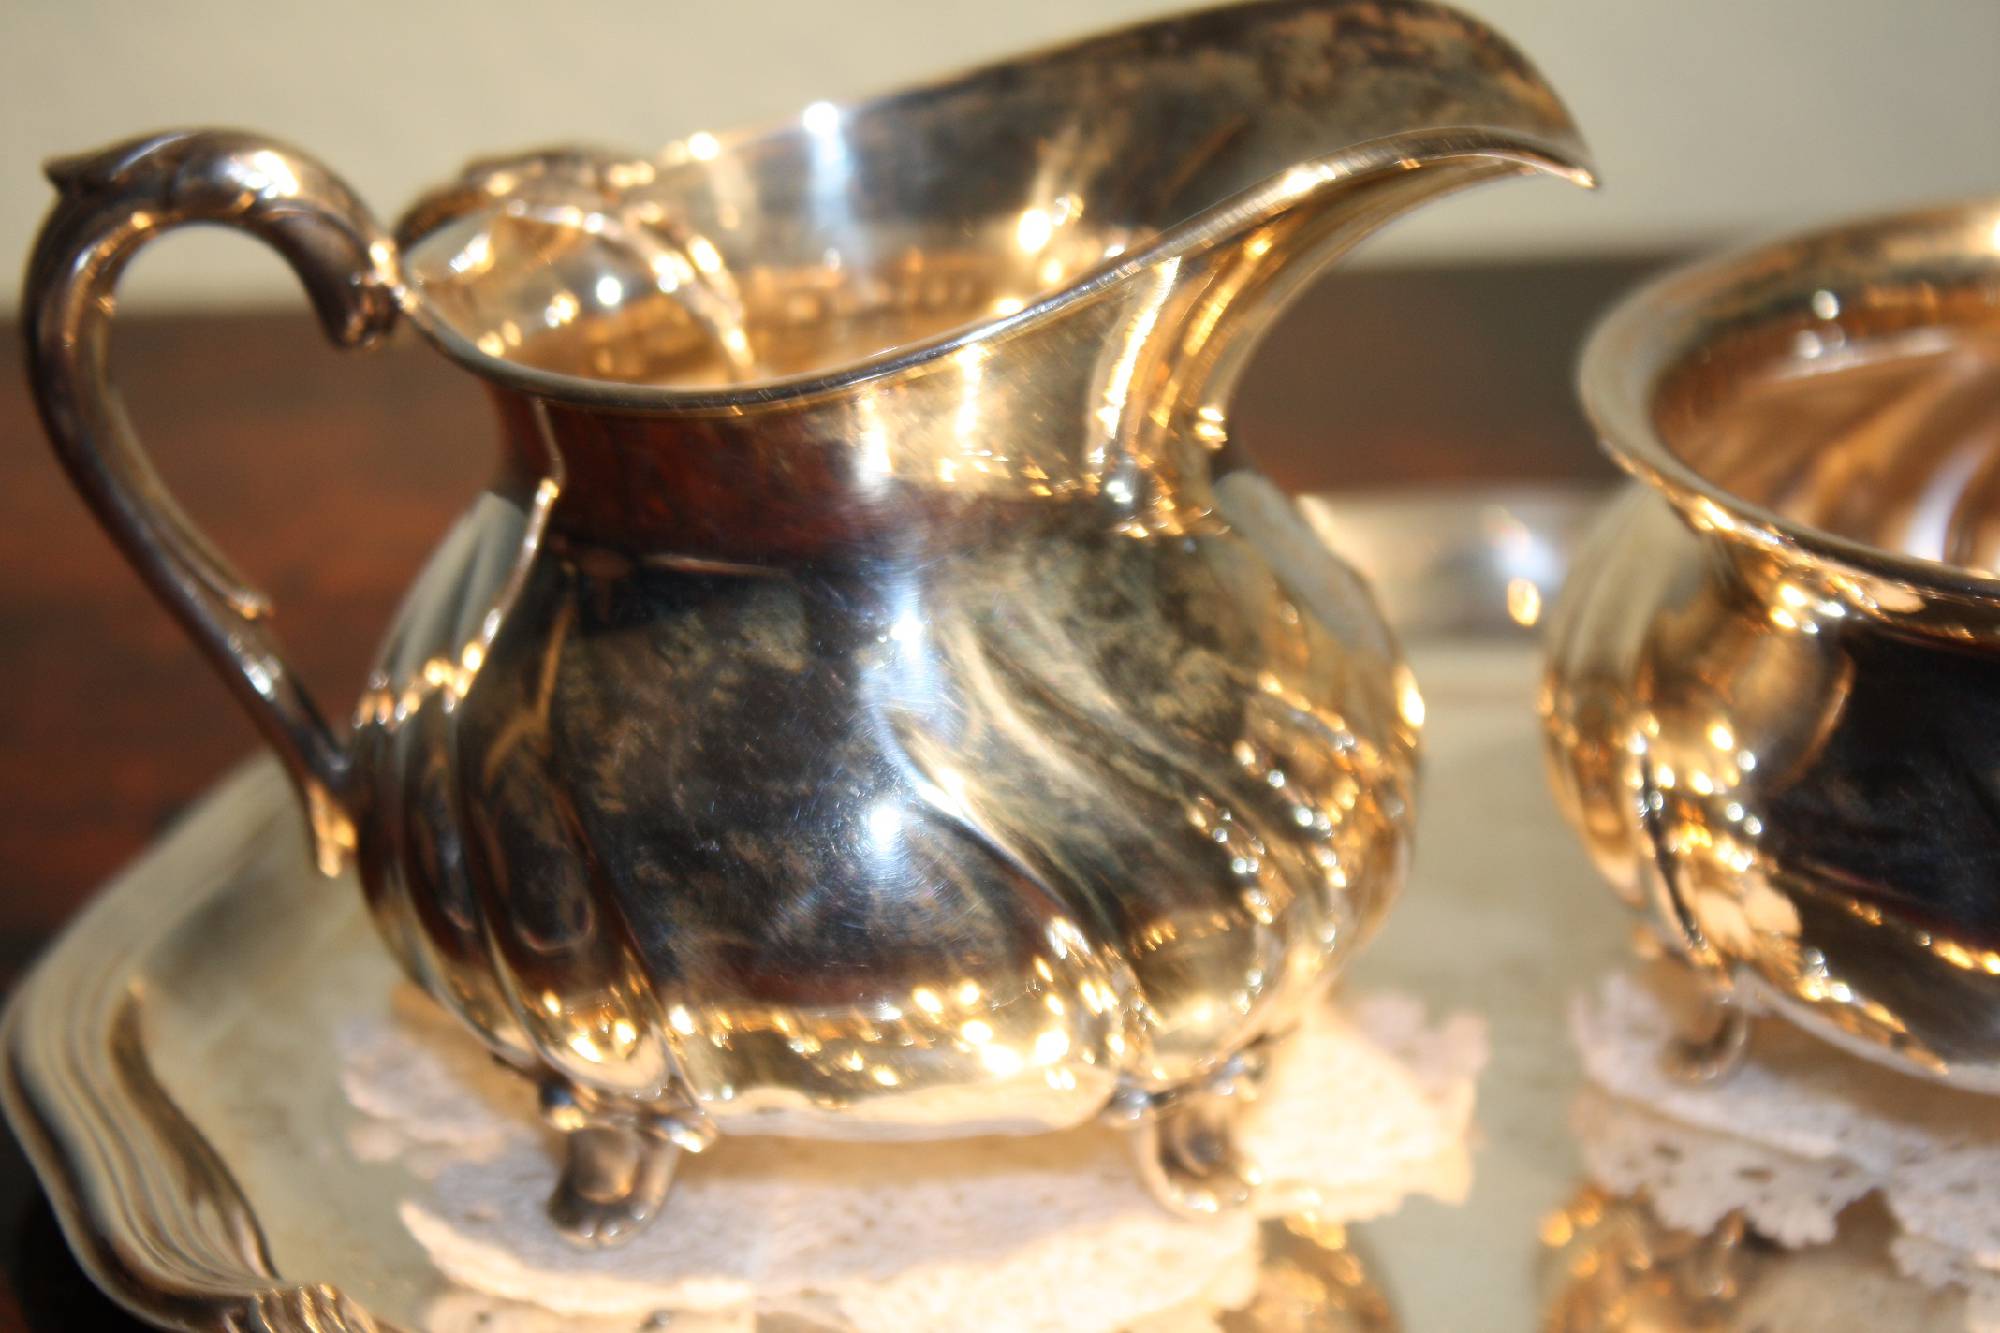 A cute antique serving set of milk jug, sugar container and matching tray, marked 830 silver, made by 'Wilkens', Bremen